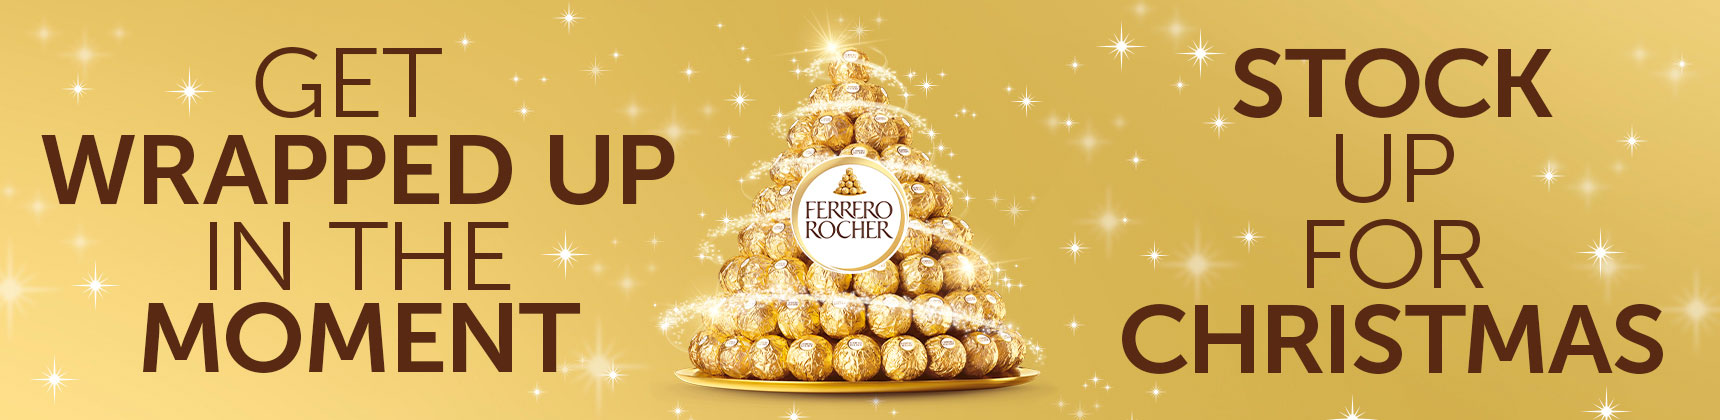 Ferrero Rocher - get wrapped up in the moment